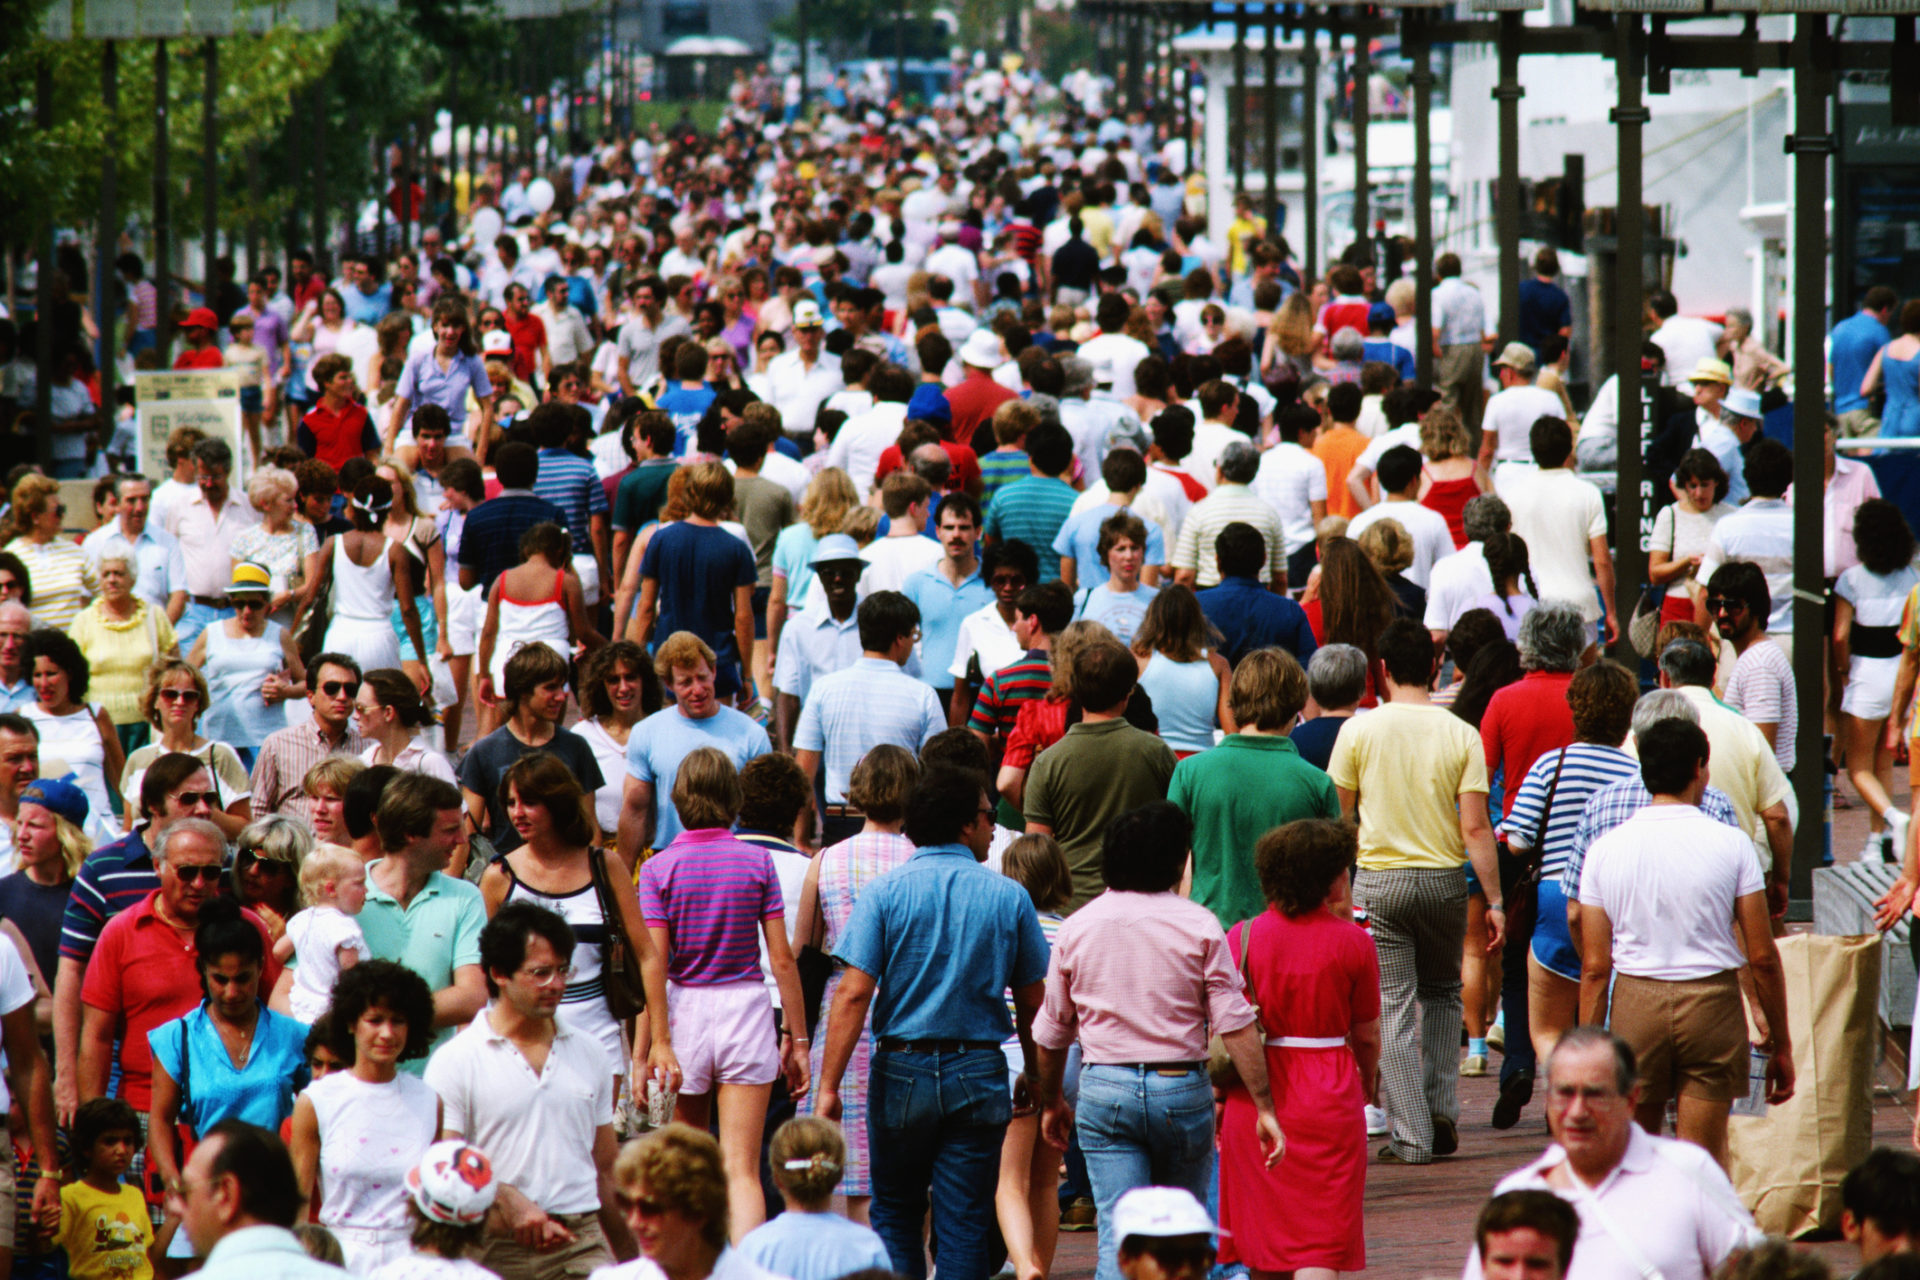 Crowds on the Pier at Harbor place in Baltimore, Maryland